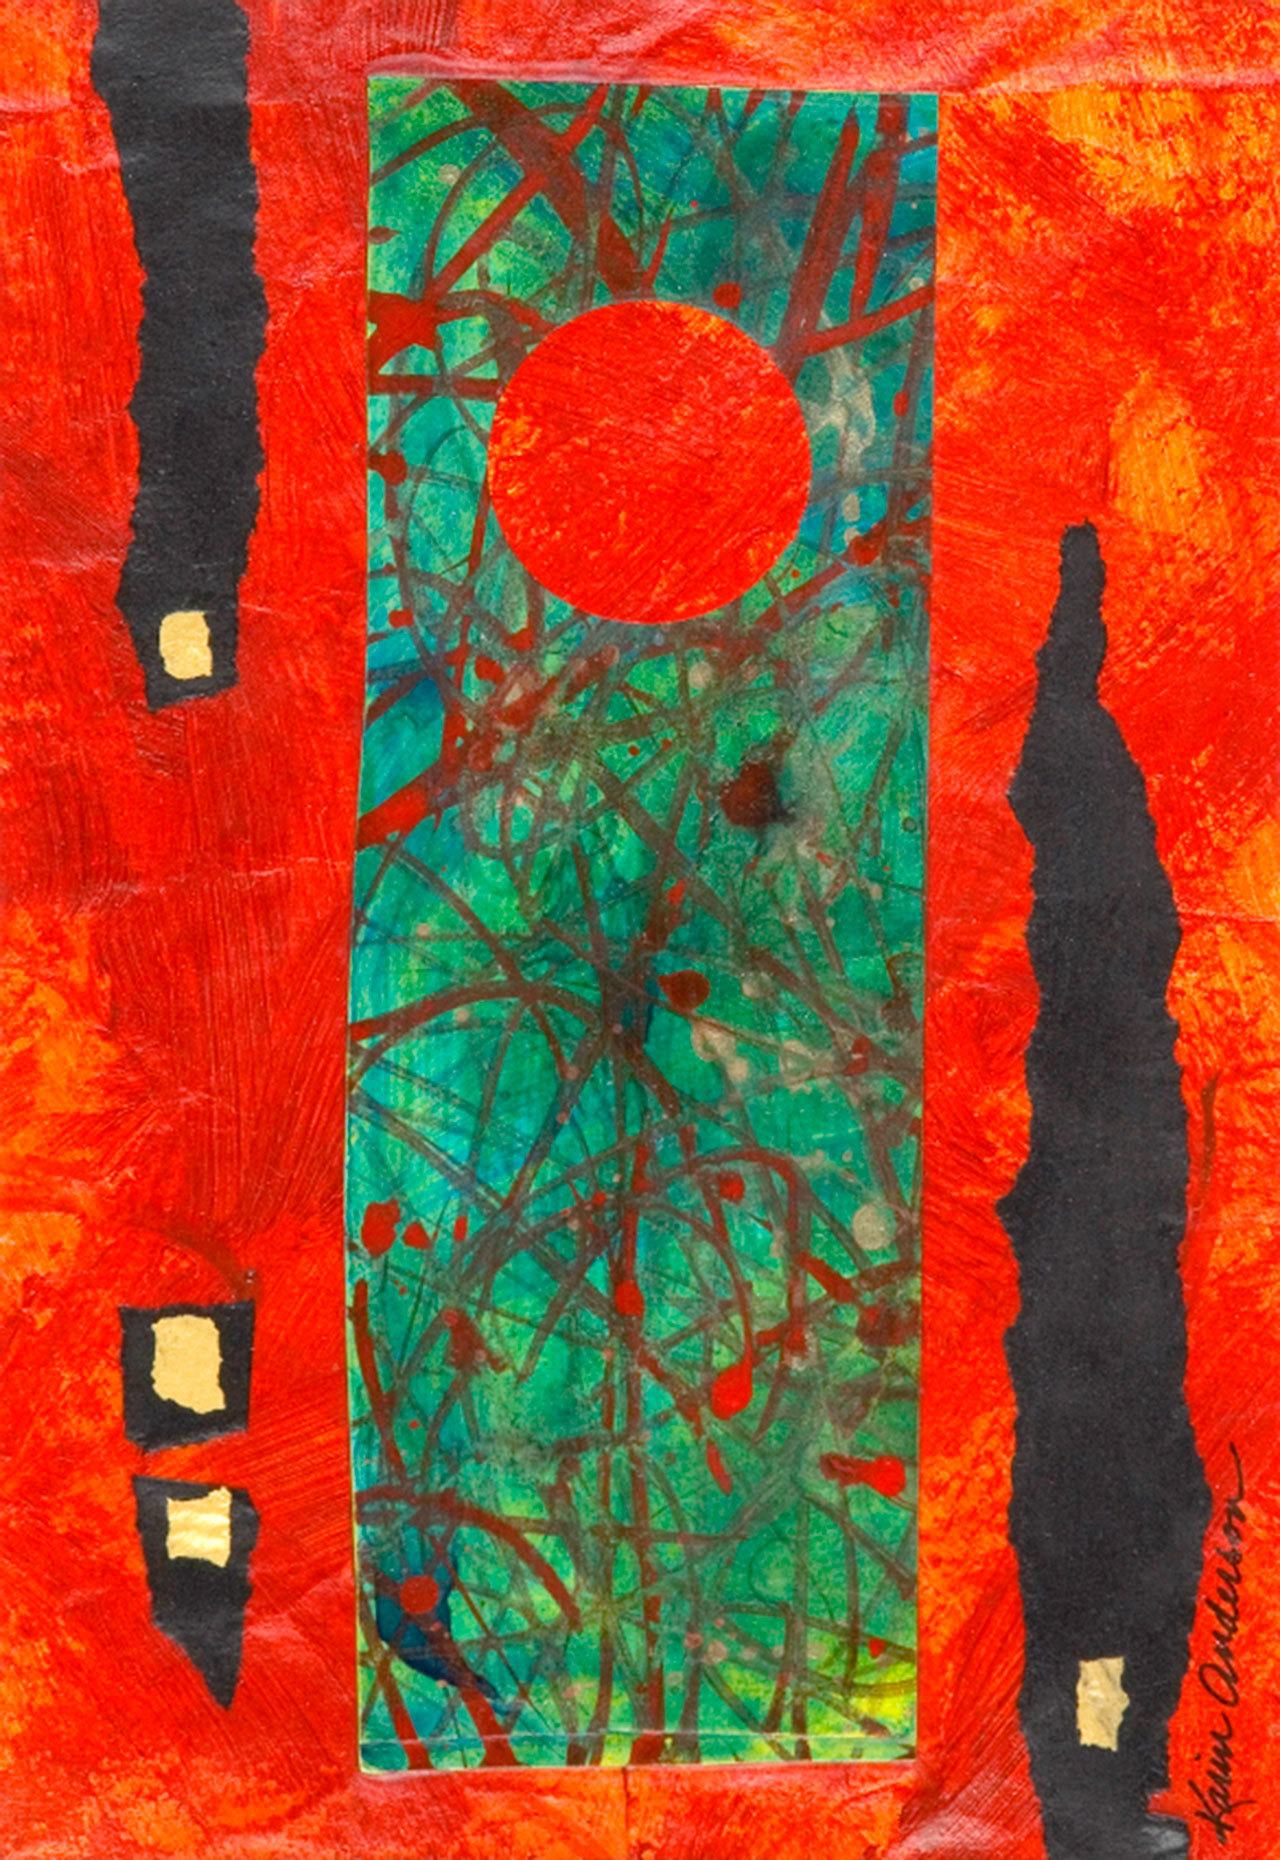 A red portal collage by Karin Anderson.